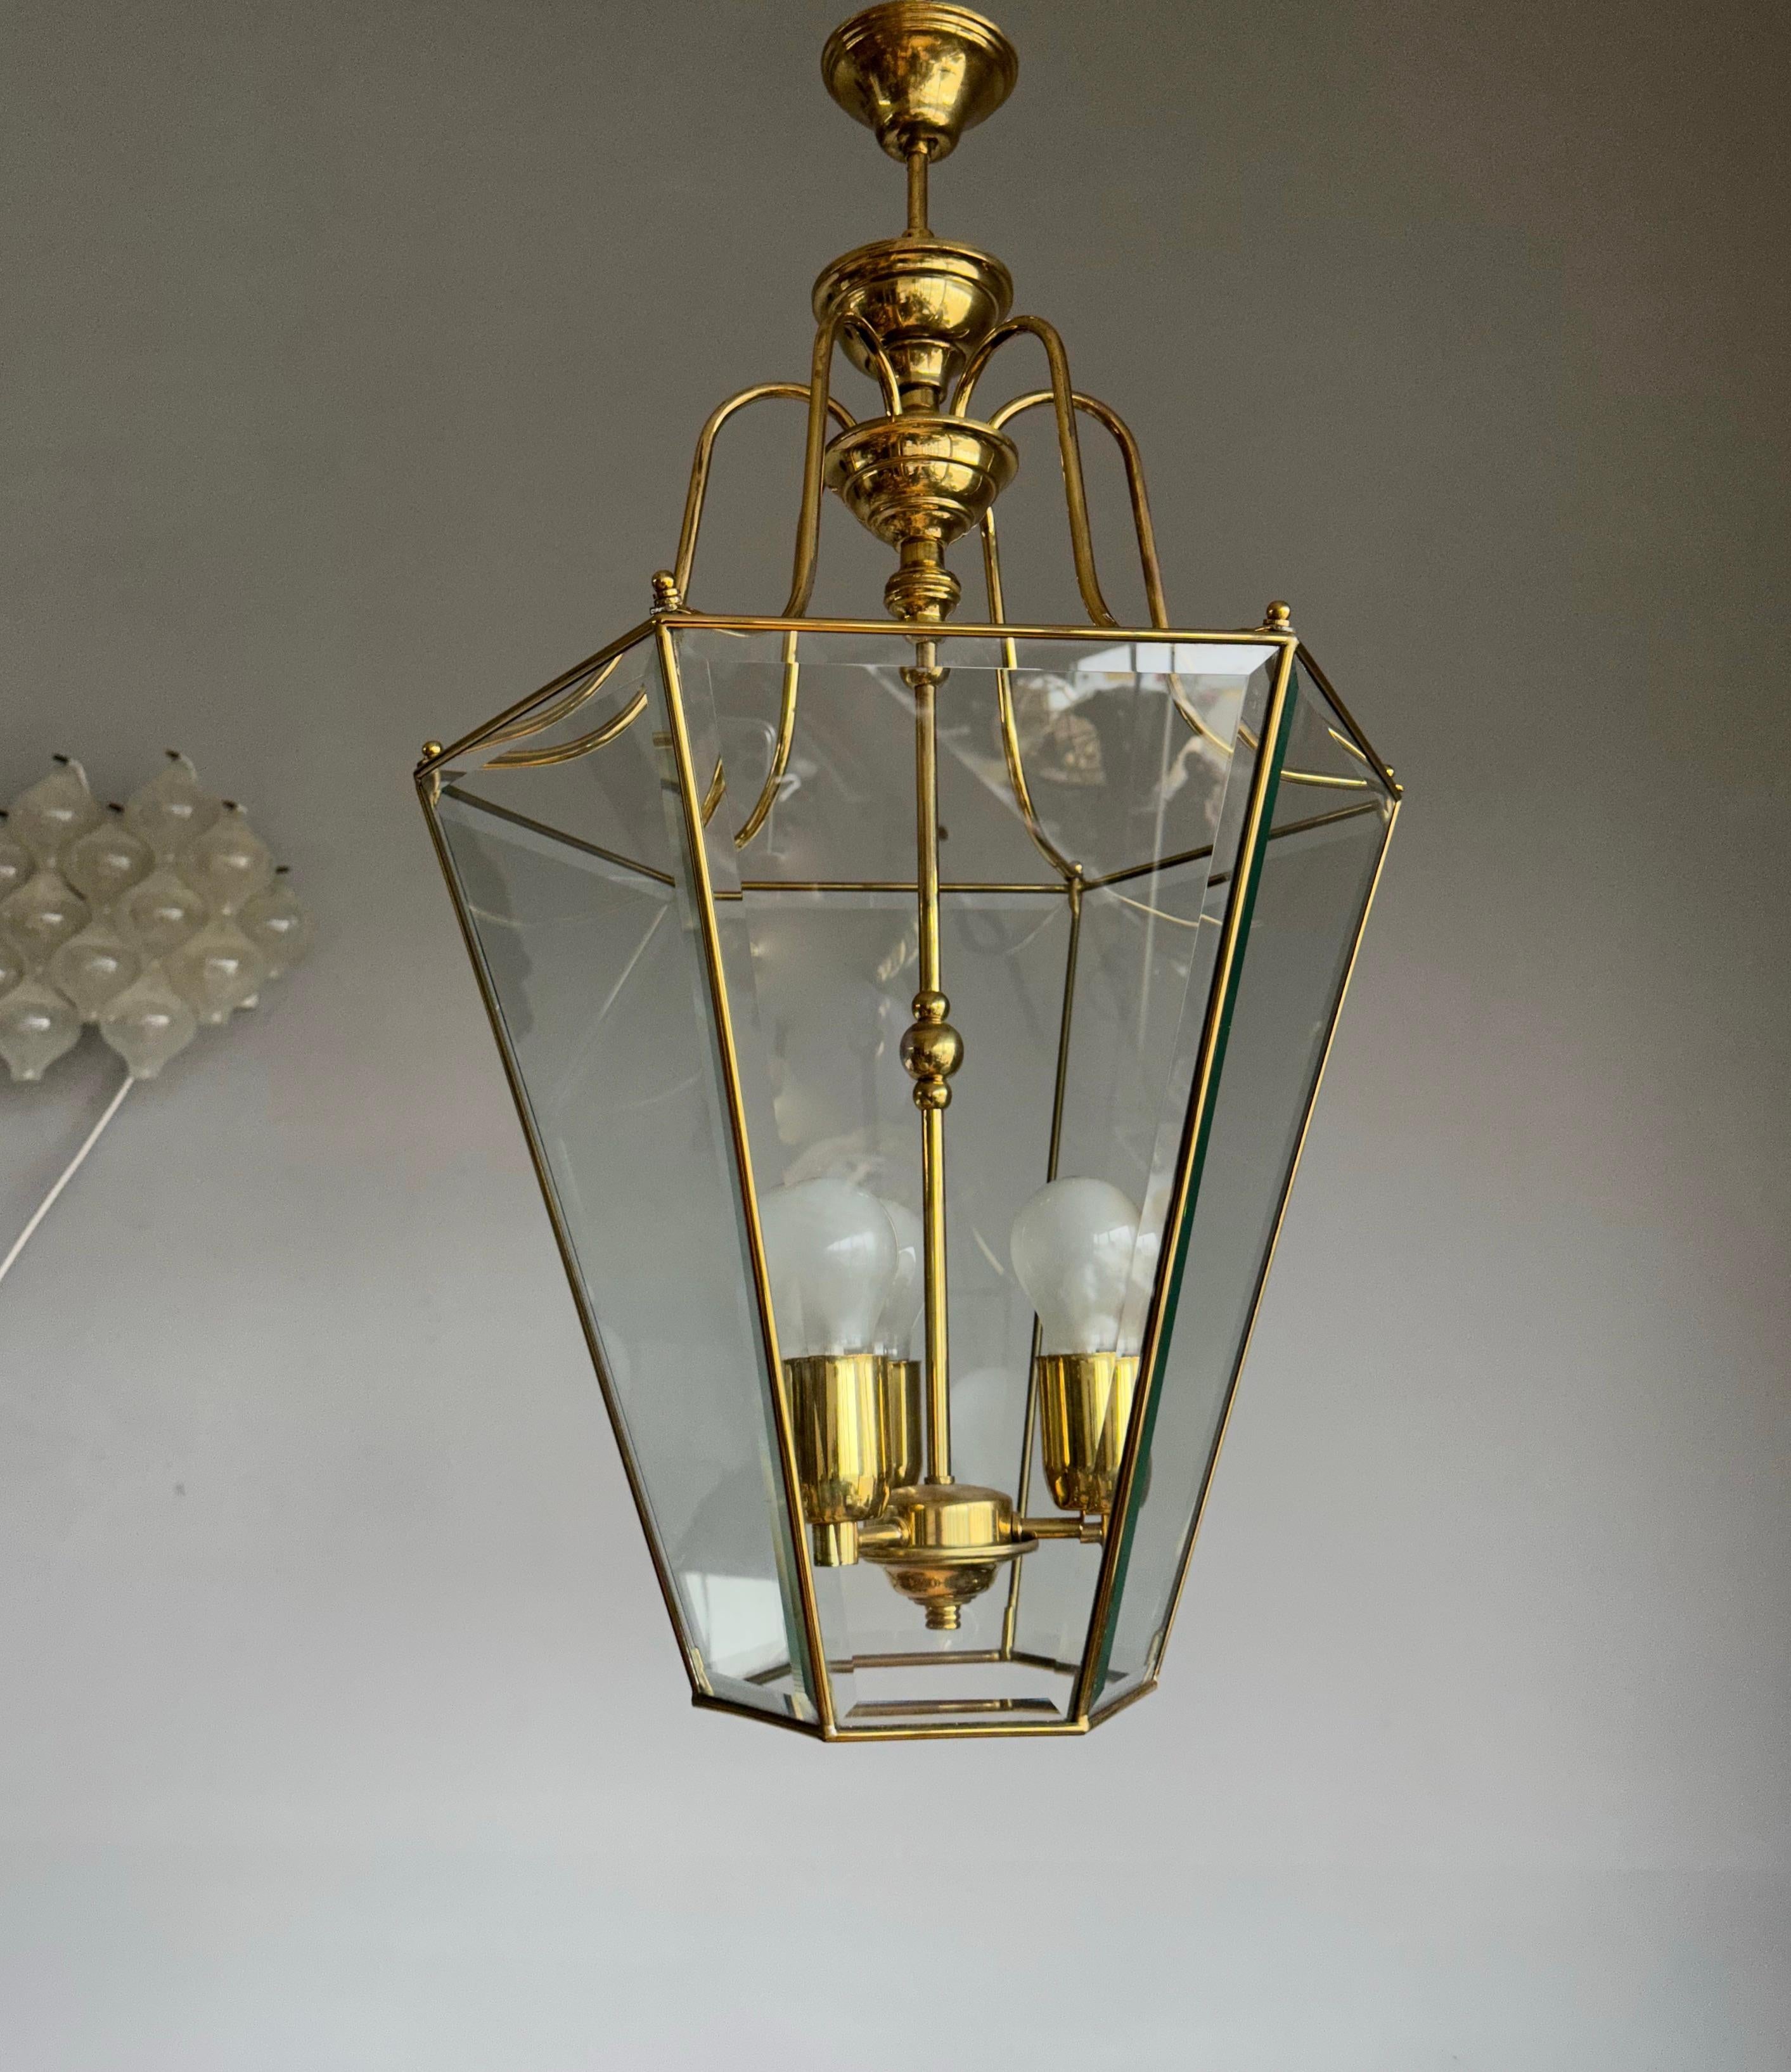 Marvelous design and beautifully executed, large 3 light pendant / lantern.

If you are looking for a stylish and quality crafted light to grace your entry hall, landing or bedroom then this Arts & Crafts style fixture could be perfect for you. With